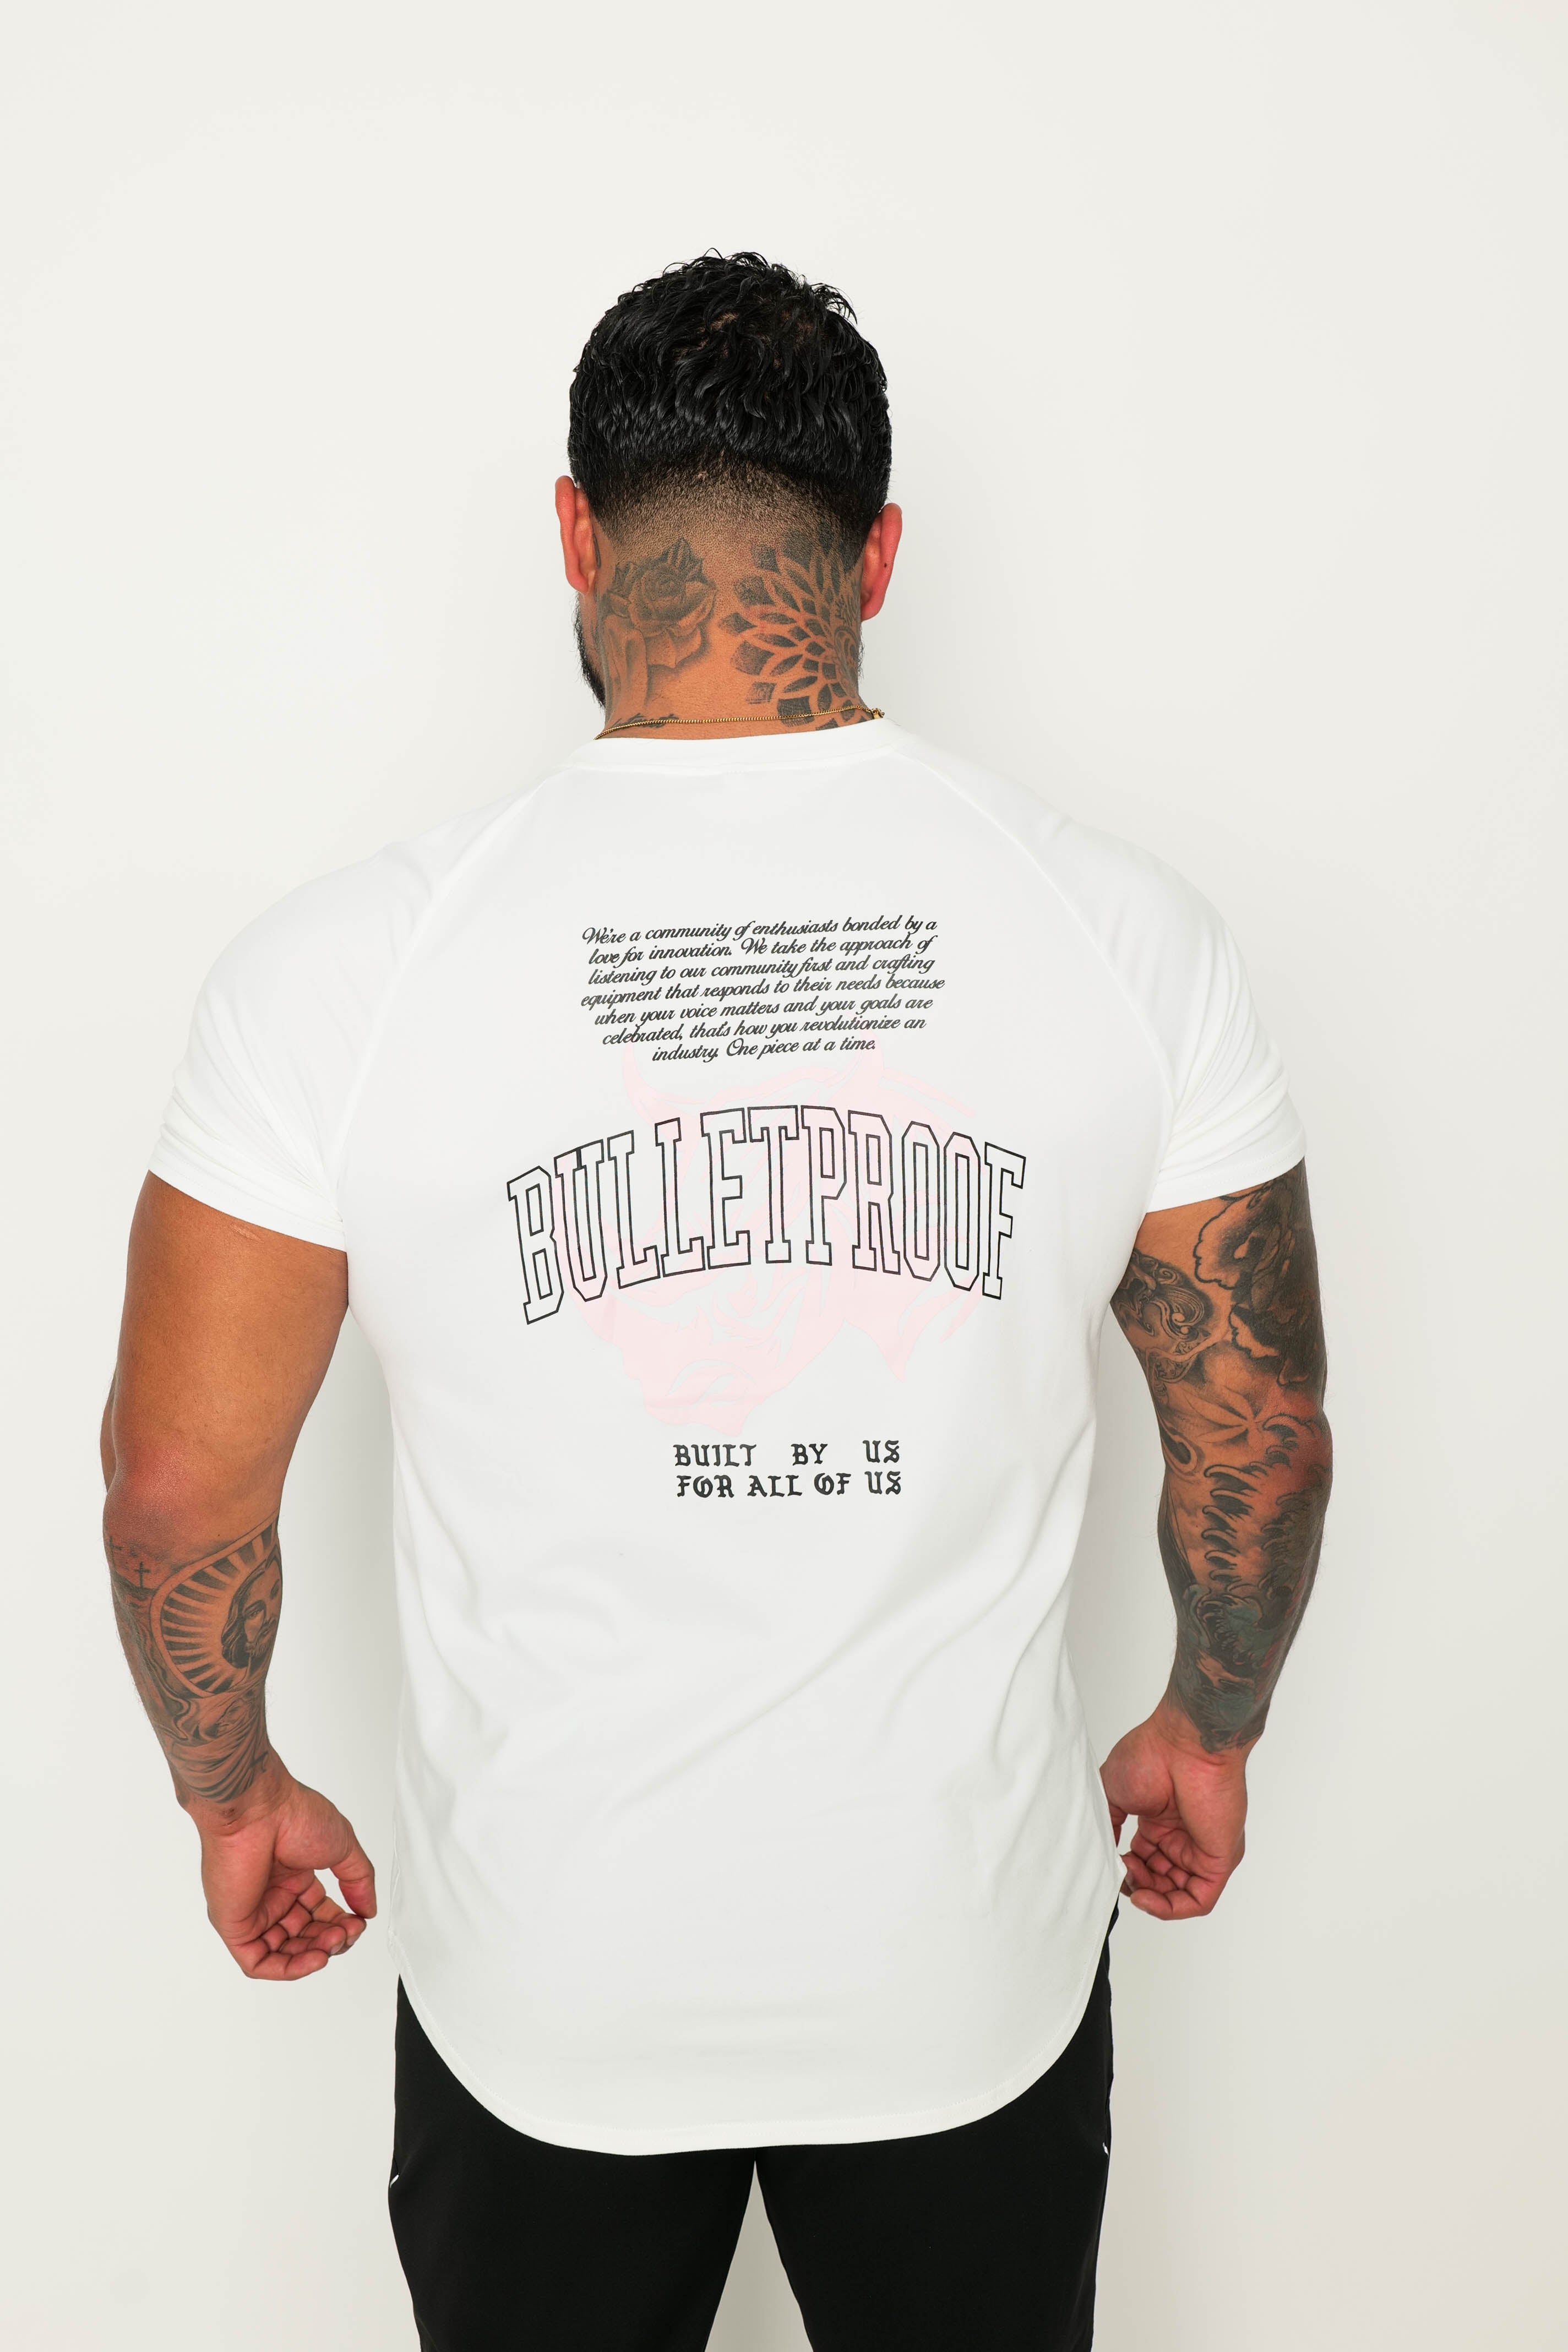 T-SHIRT - Bulletproof Power Team: Built by Us for Us